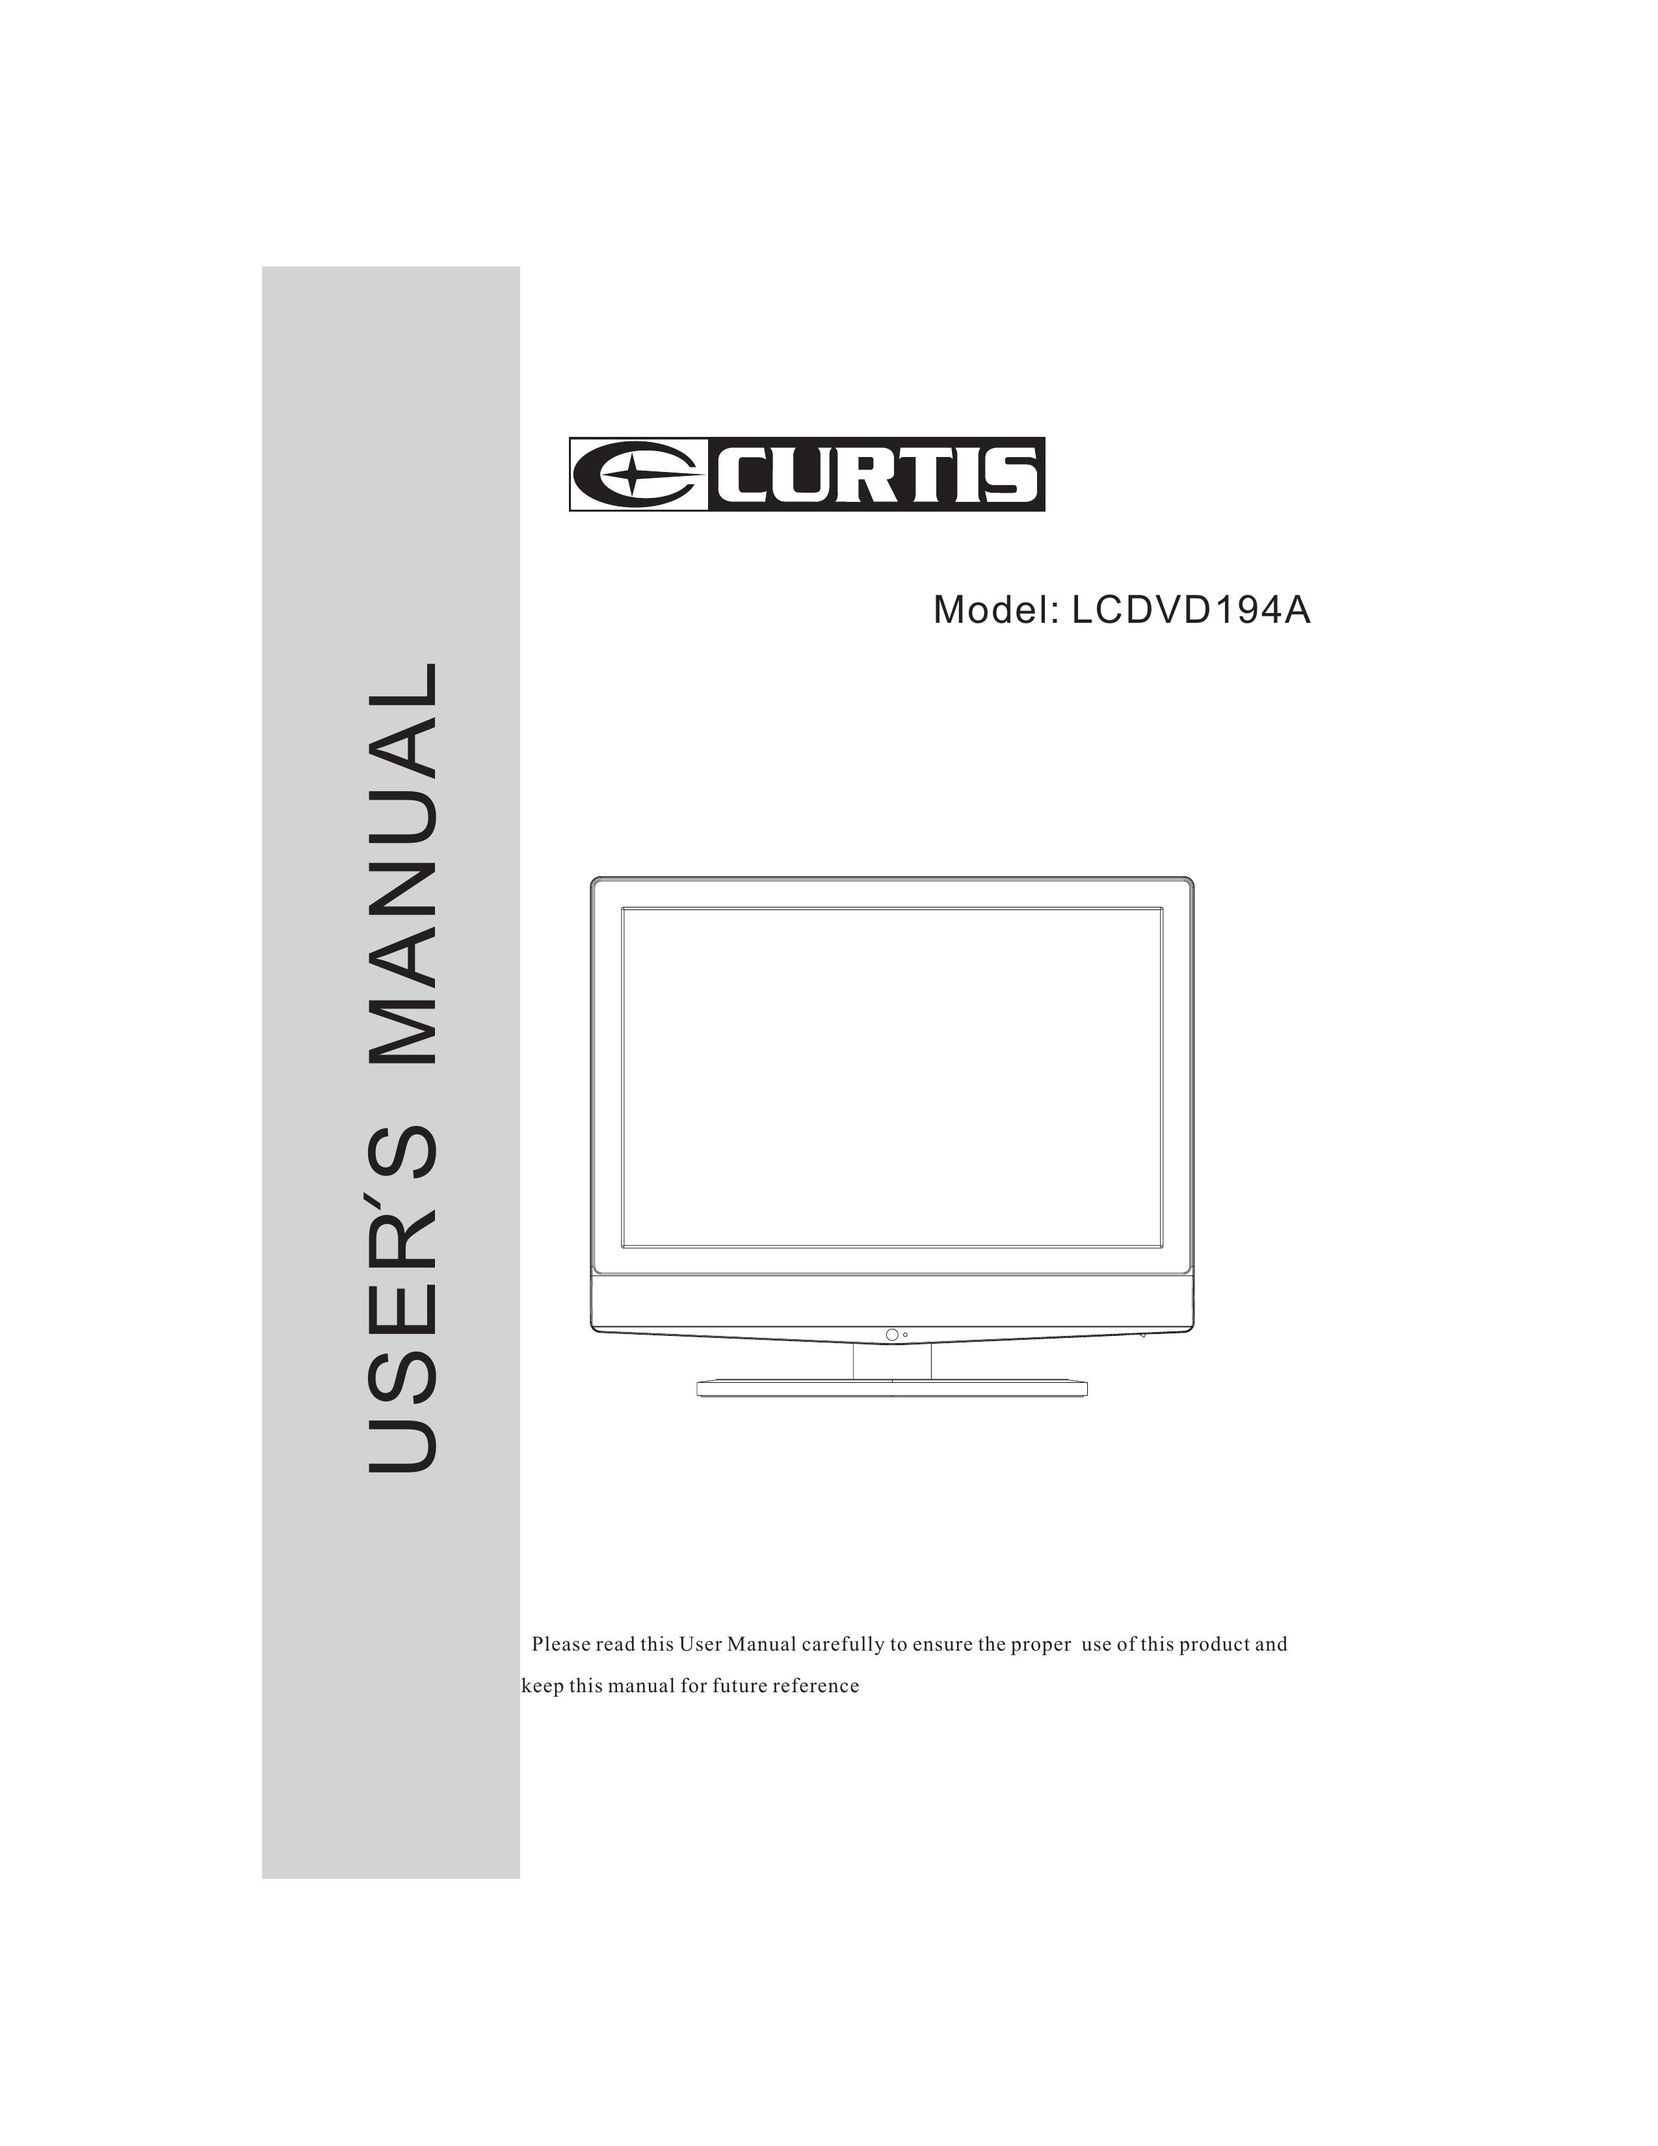 Curtis LCDVD194A Flat Panel Television User Manual